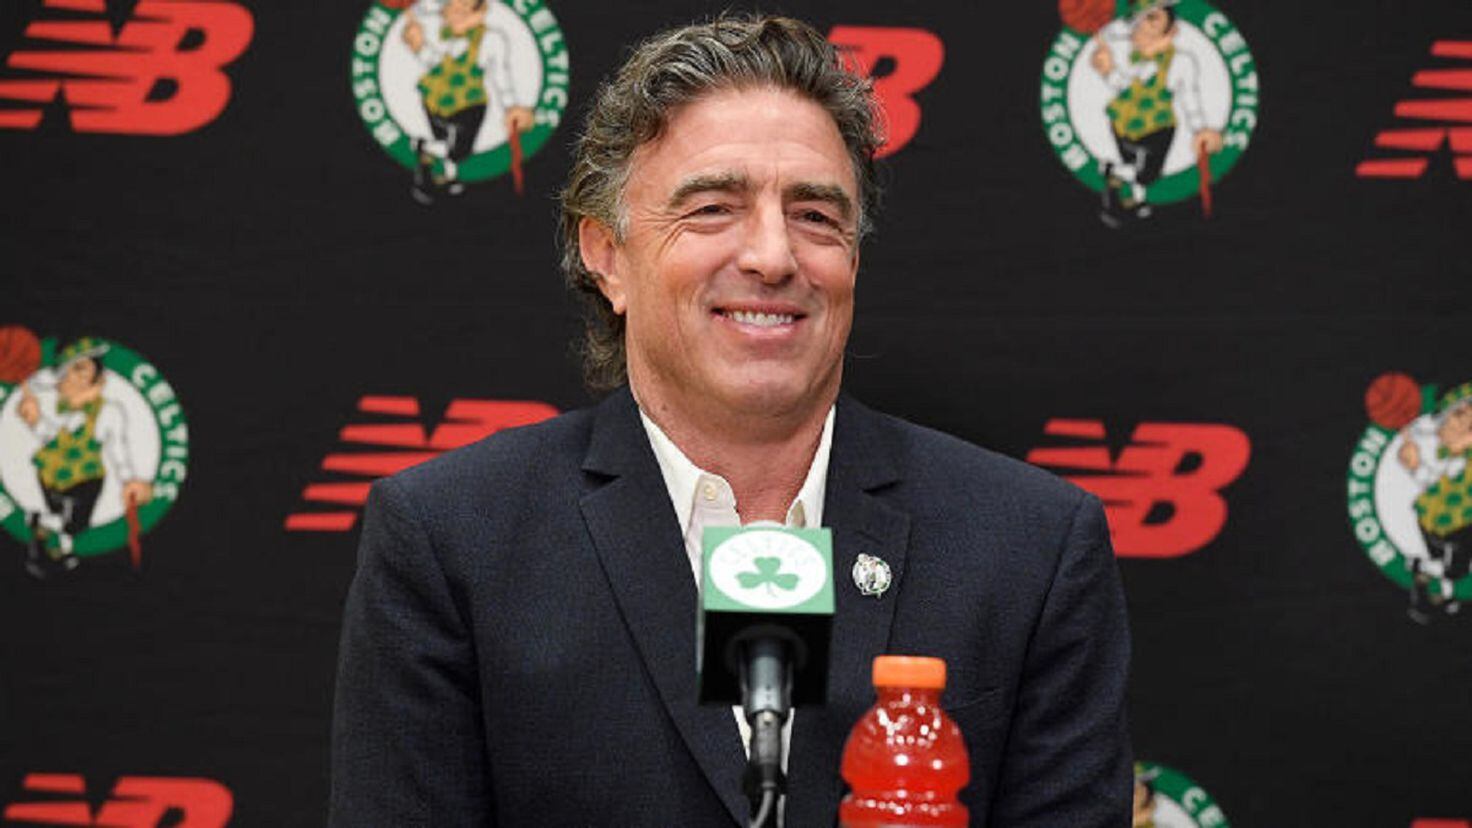 Why does Boston Celtics owner Wyc Grousbeck think his team is overrated